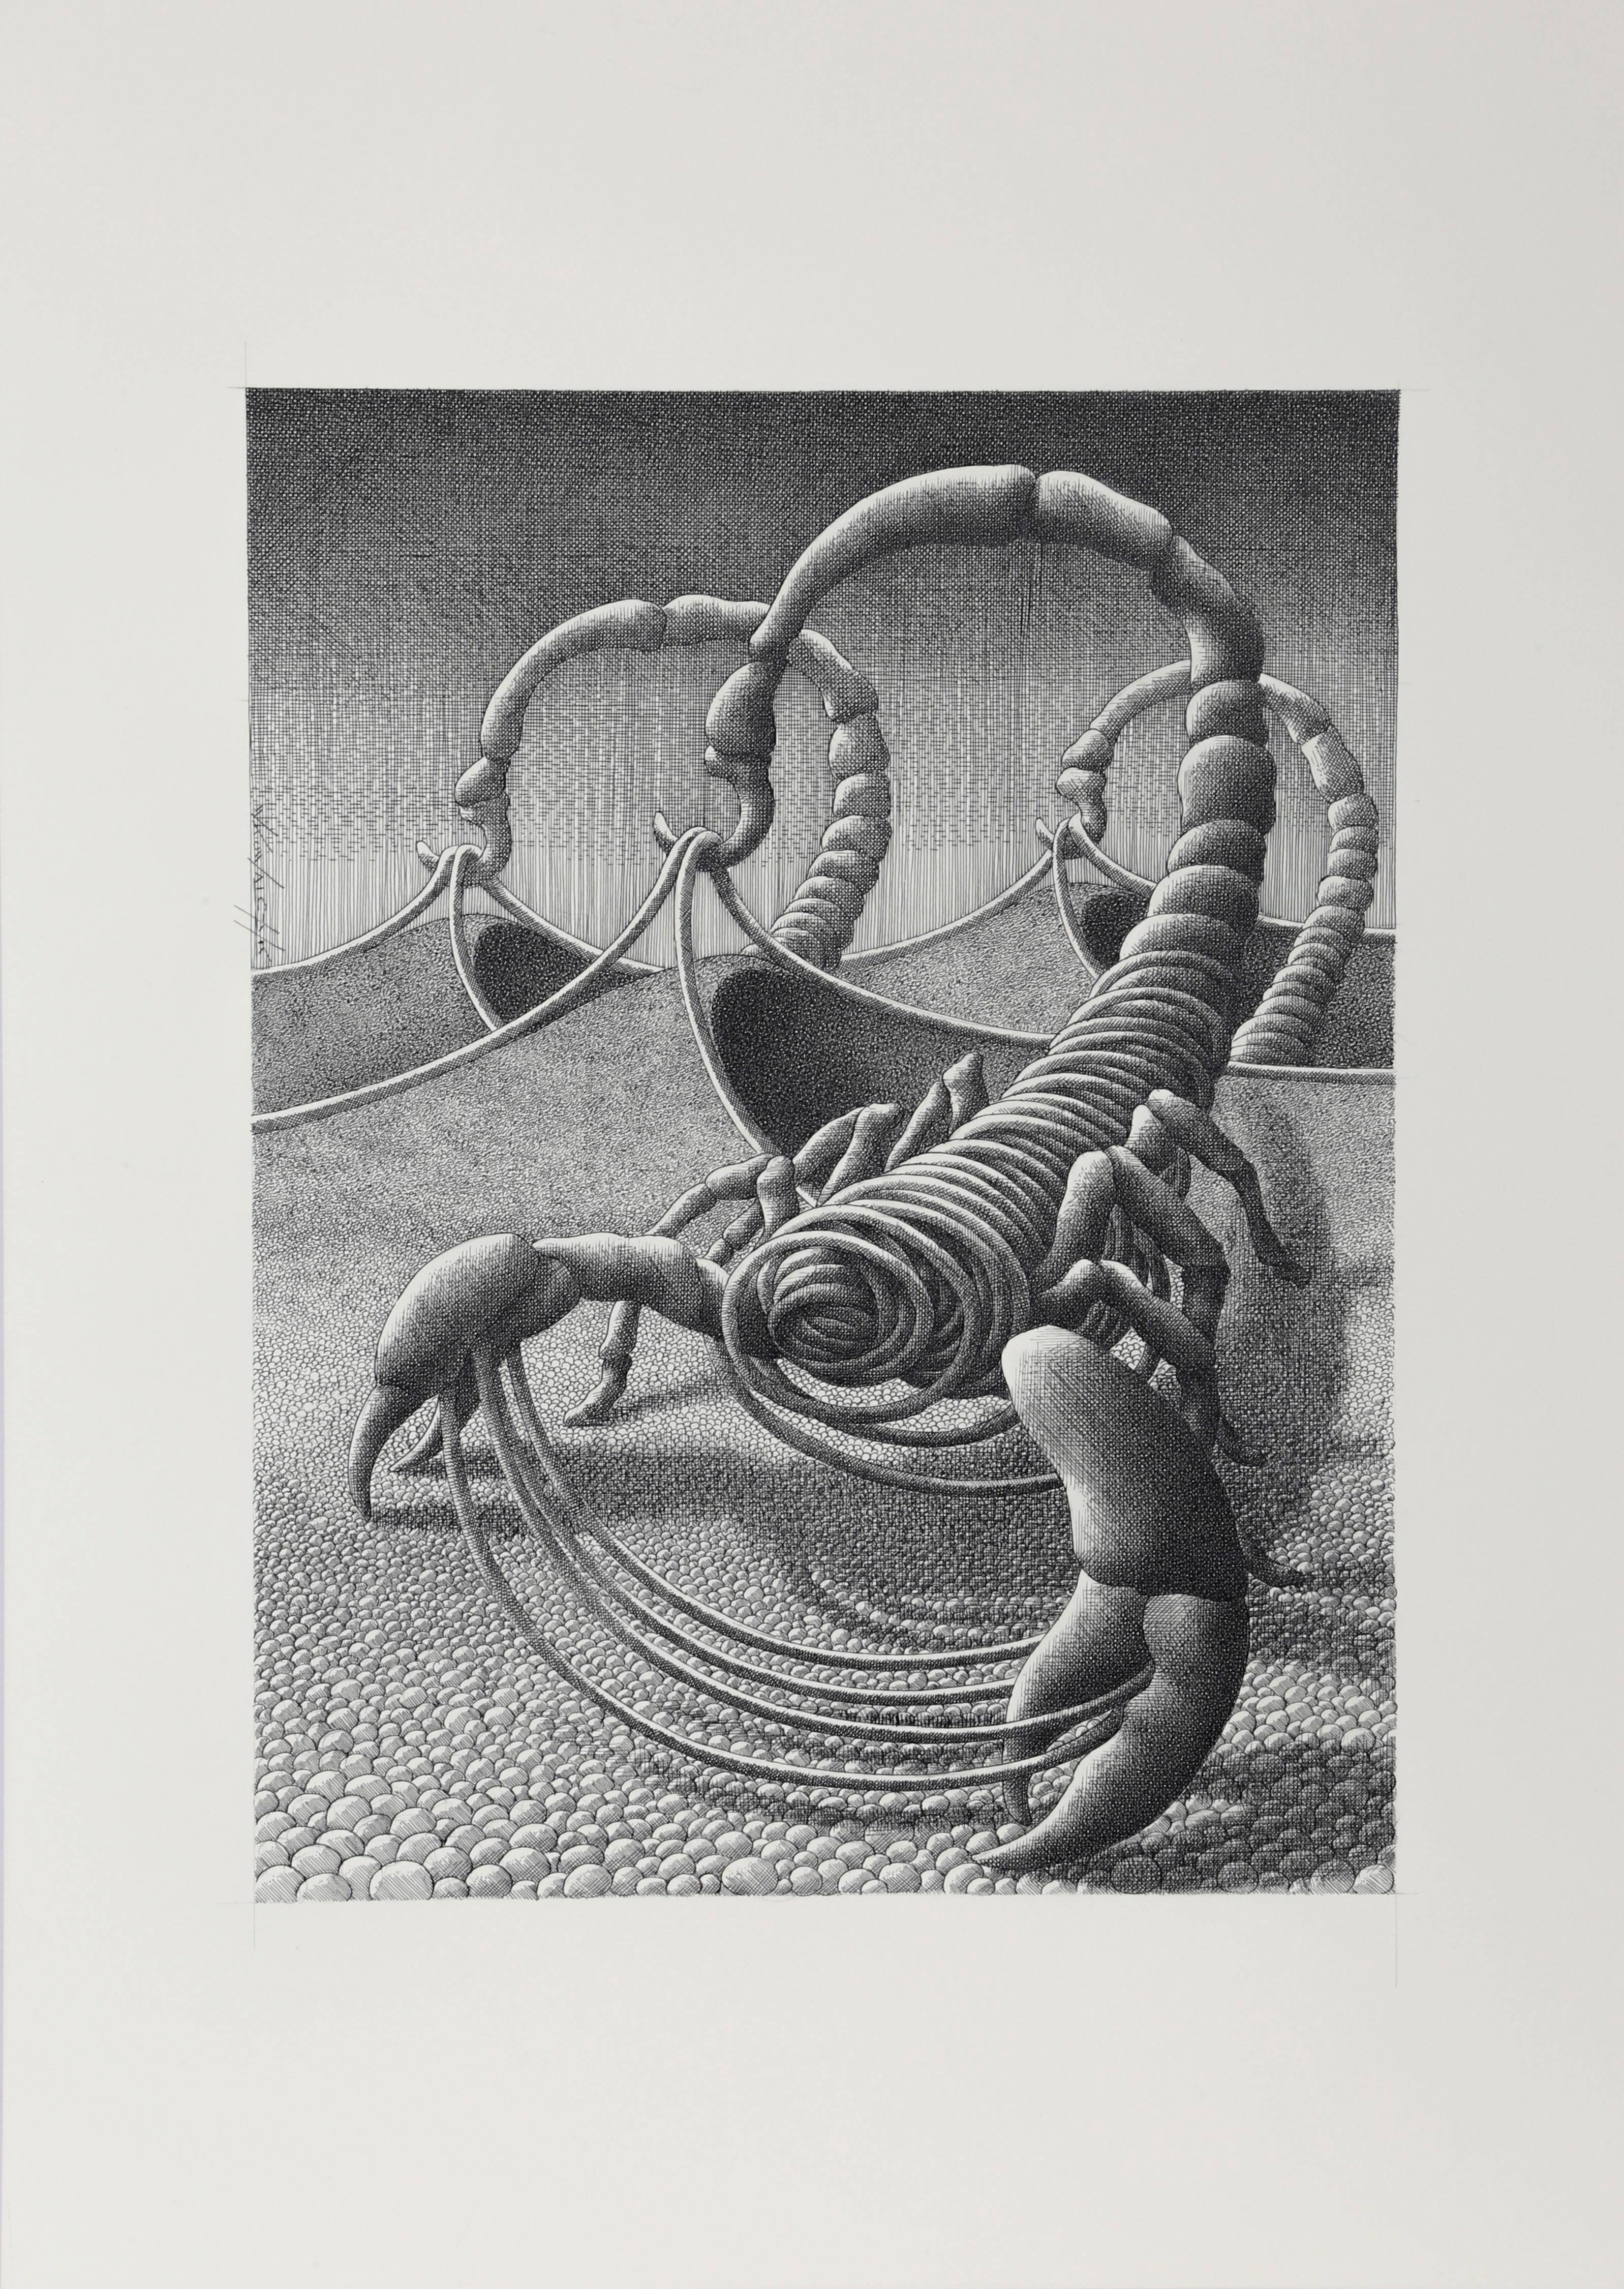 A detailed and hand-drawn work on paper by Polish artist Wojtek Kowalczyk of scorpions in sand dunes. The scorpions, however, are made of twining ropes that seem to be pulled by their hooked tails from the tops of the dunes themselves. This